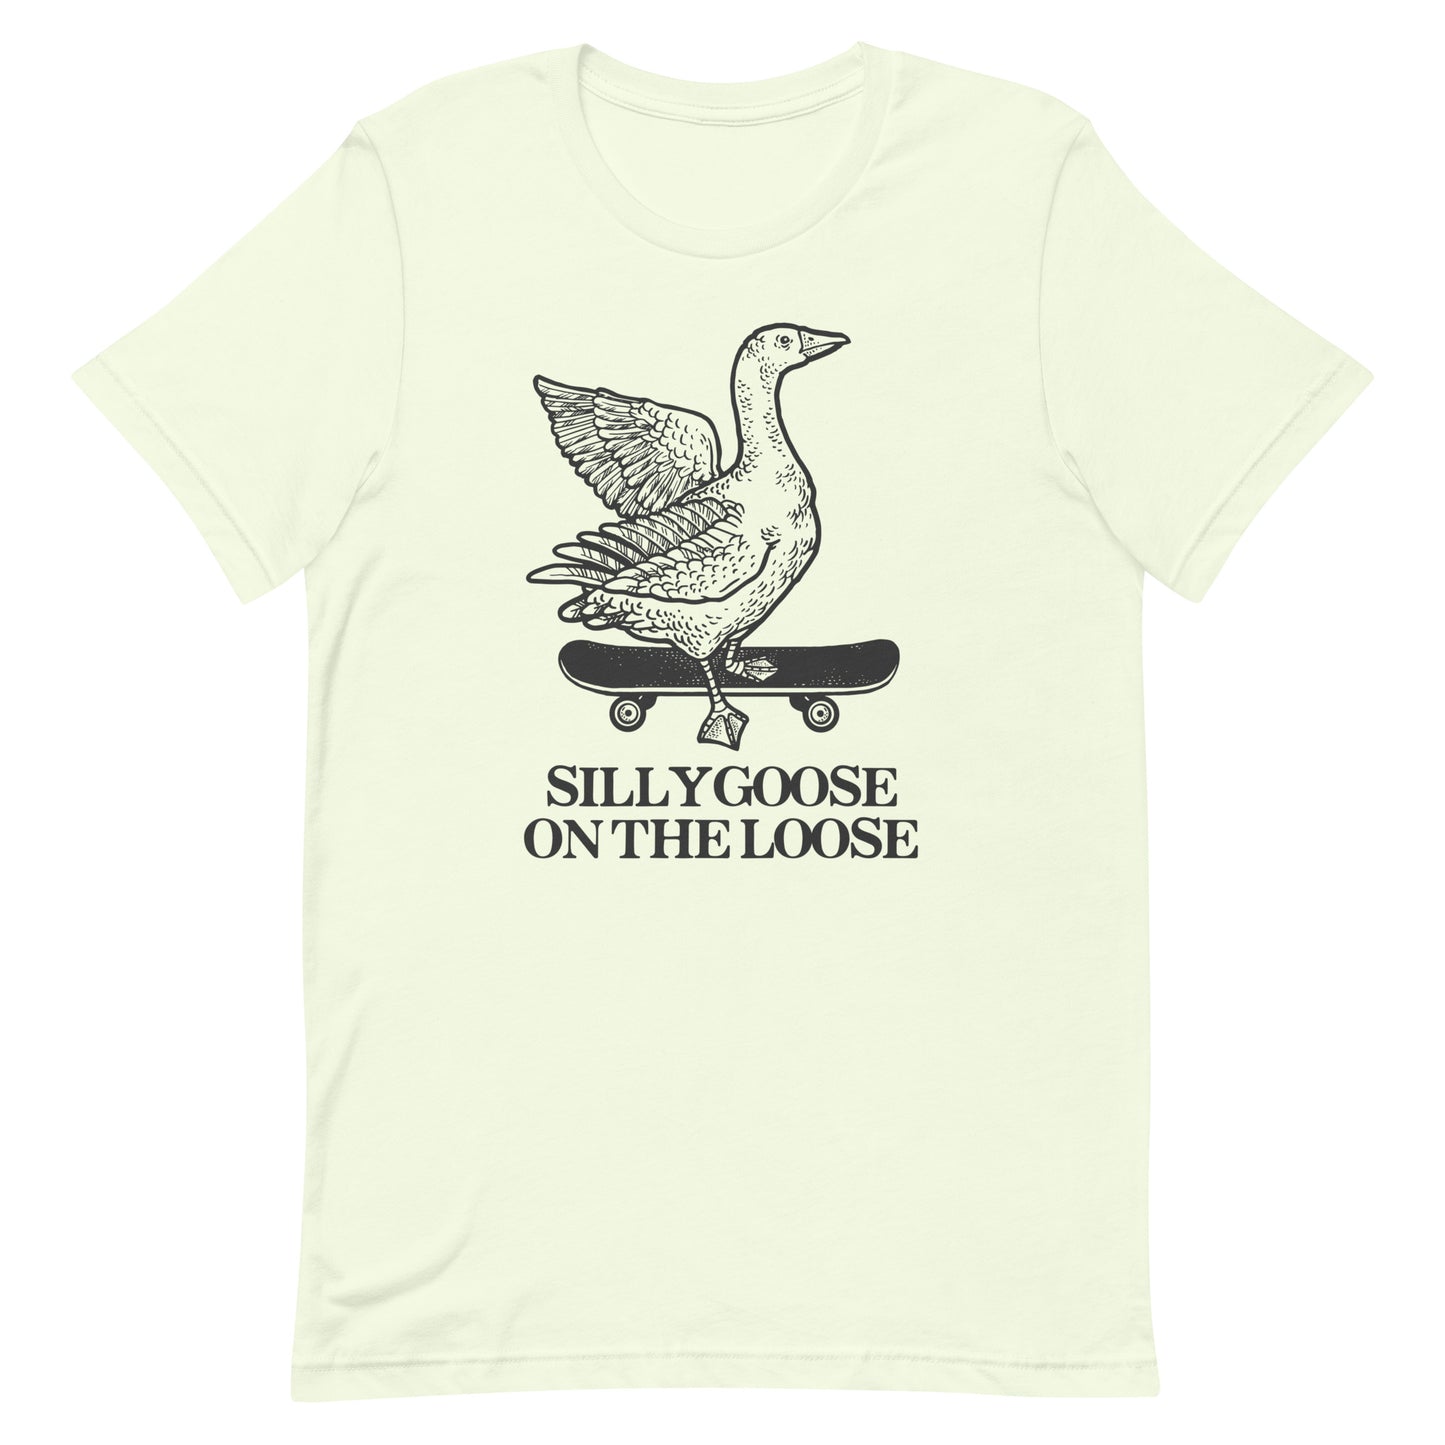 Silly Goose on the Loose Unisex t-shirt